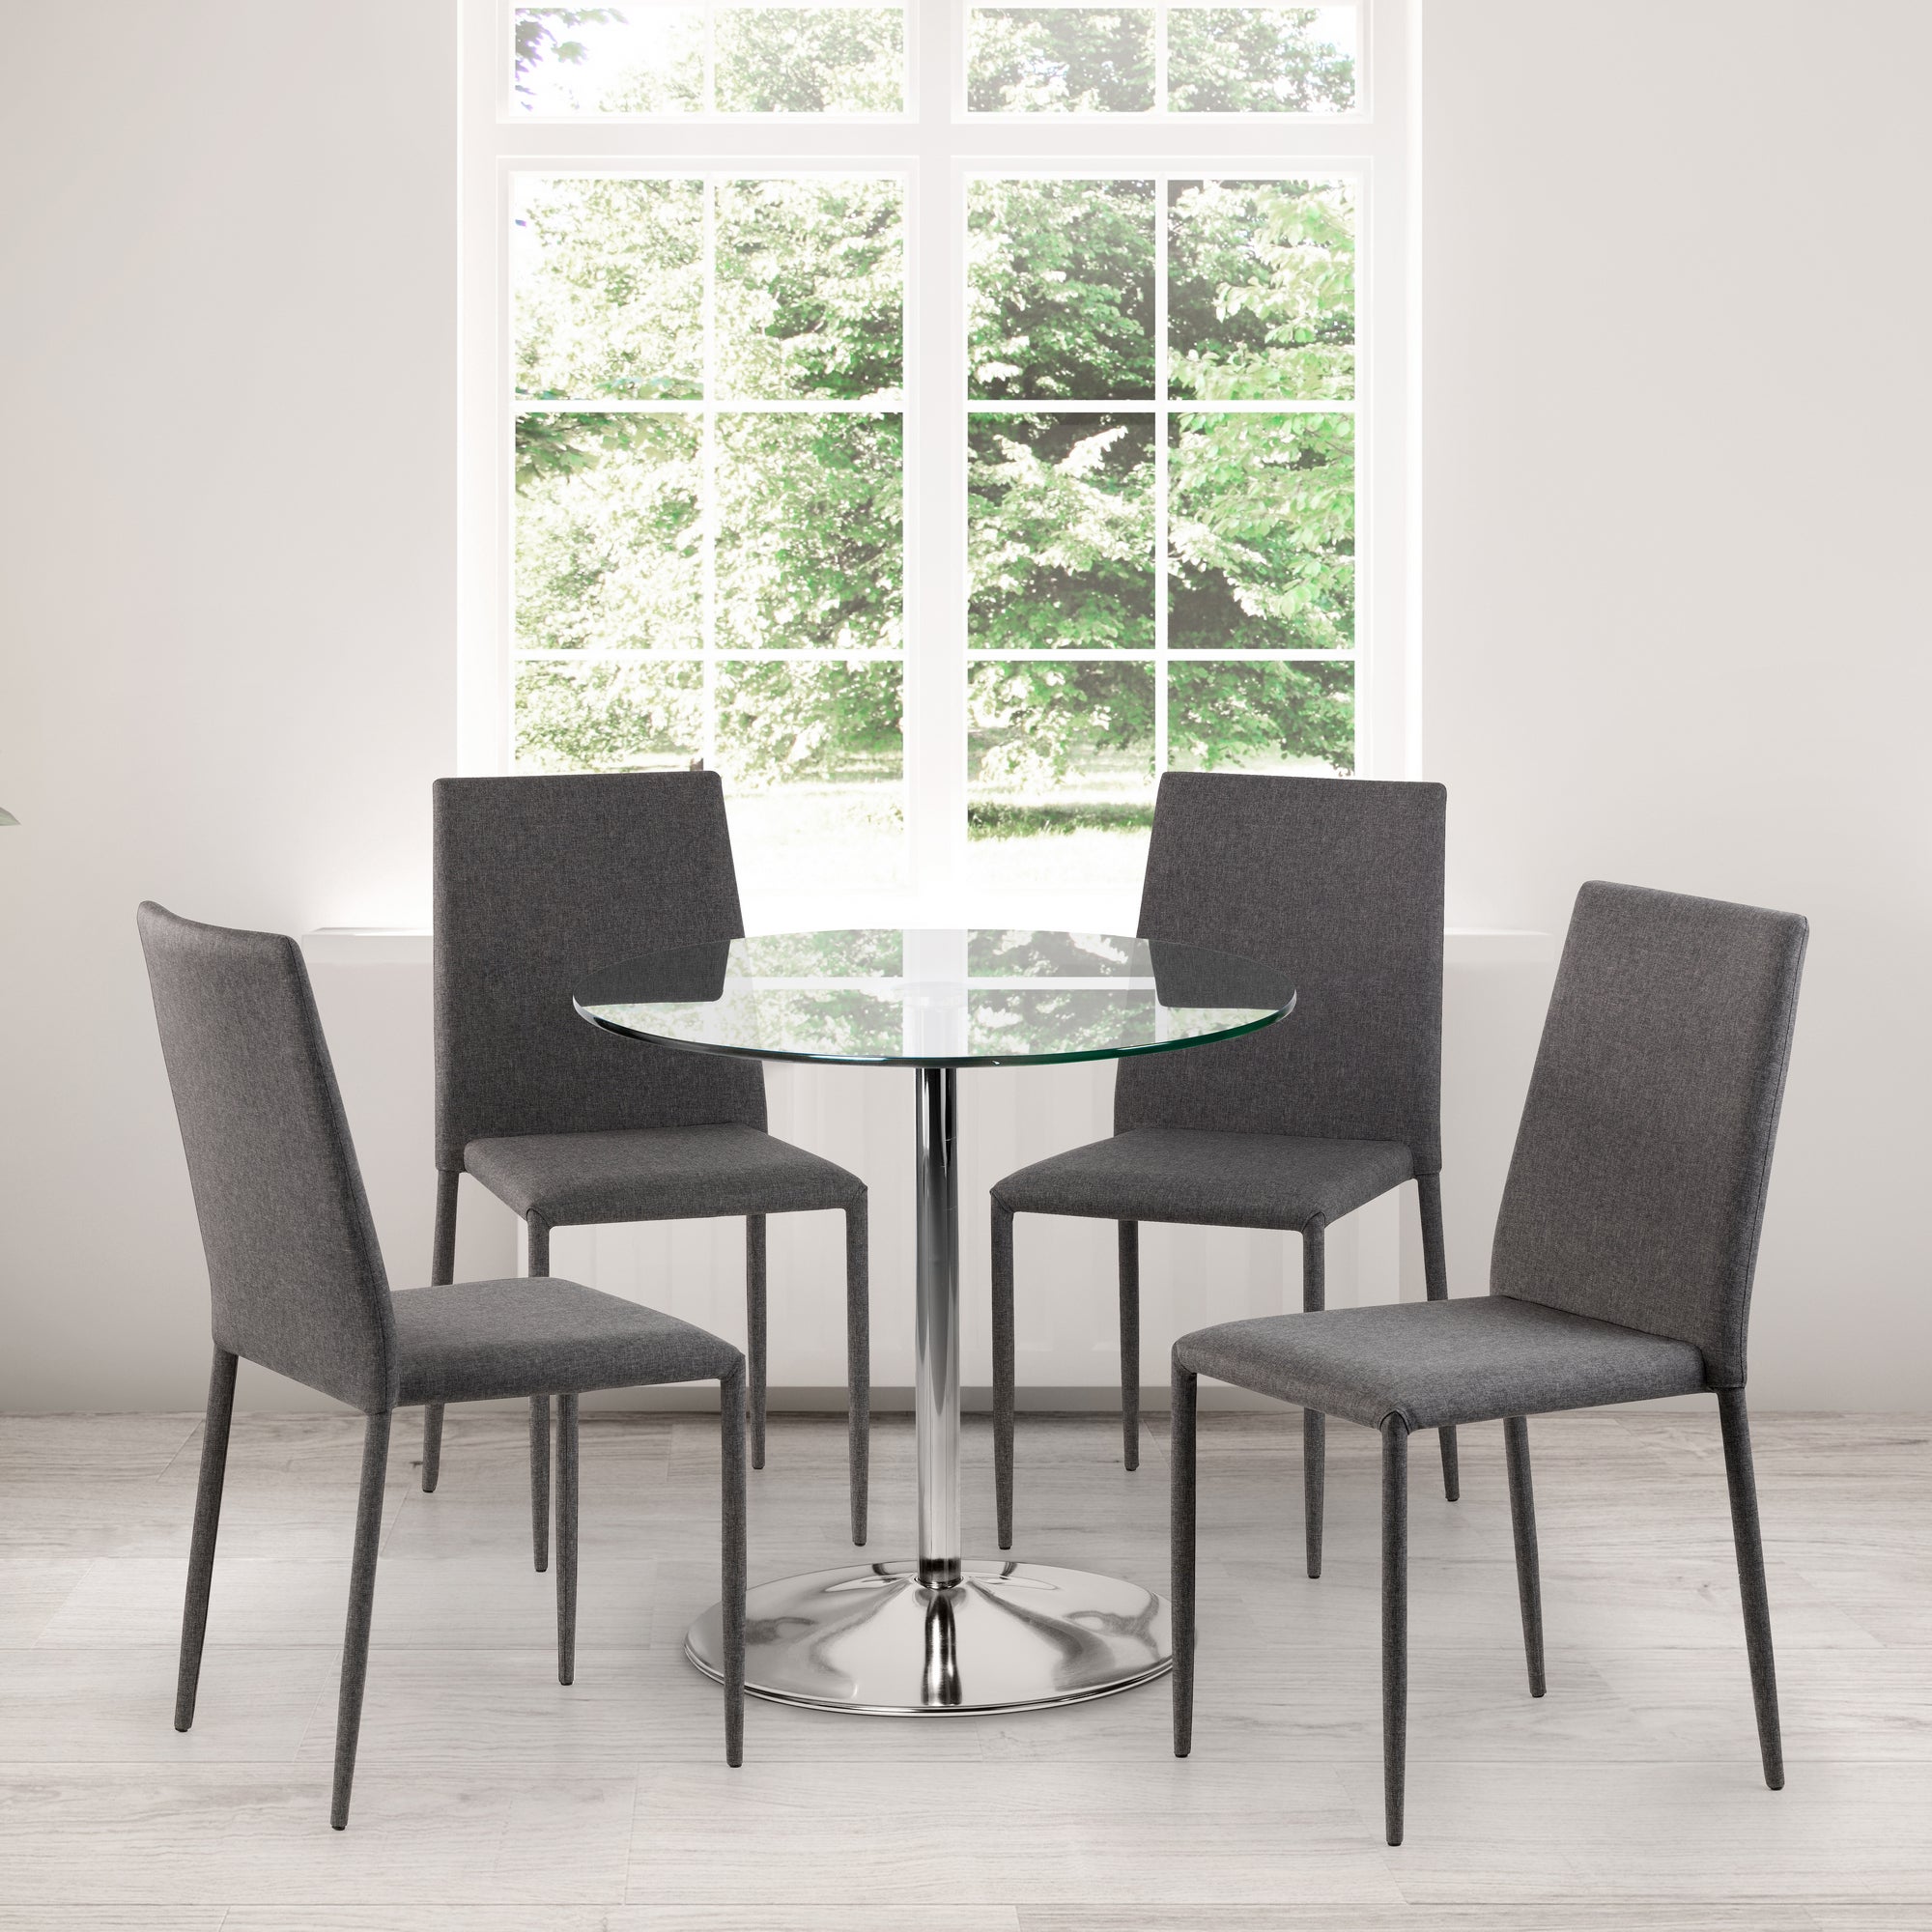 Kudos 4 Seater Round Glass Top Pedestal Dining Table Silver Chrome